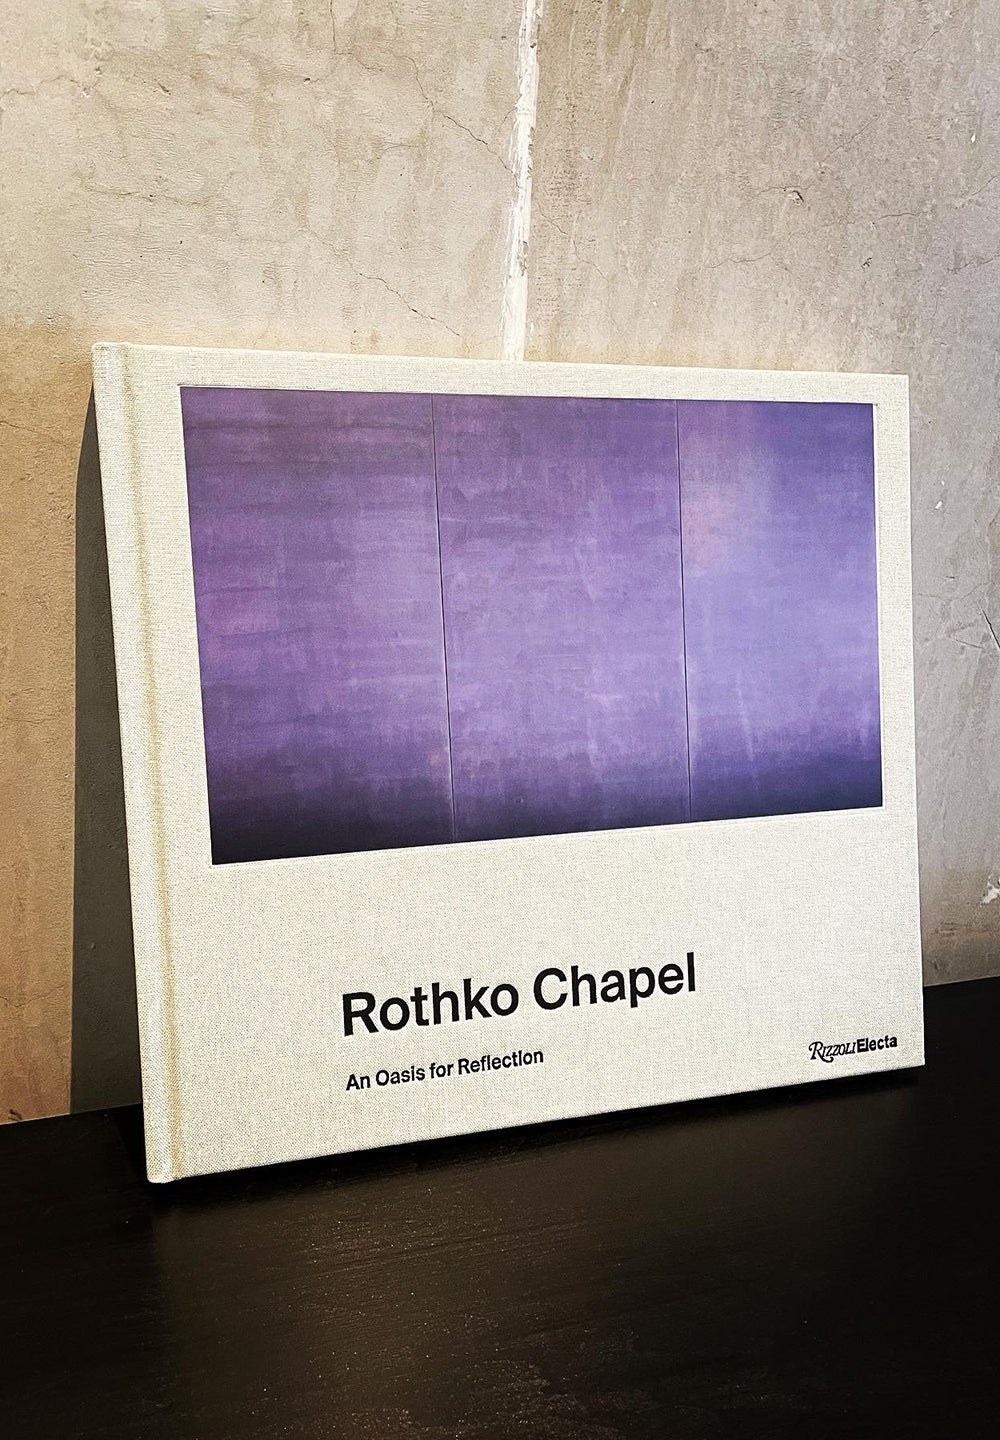 Chapelle Rothko | Chapelle Rosco | Livre | Rizzoli Electa | 132 pages | Couverture dure | 260 x 287 mm | 2021